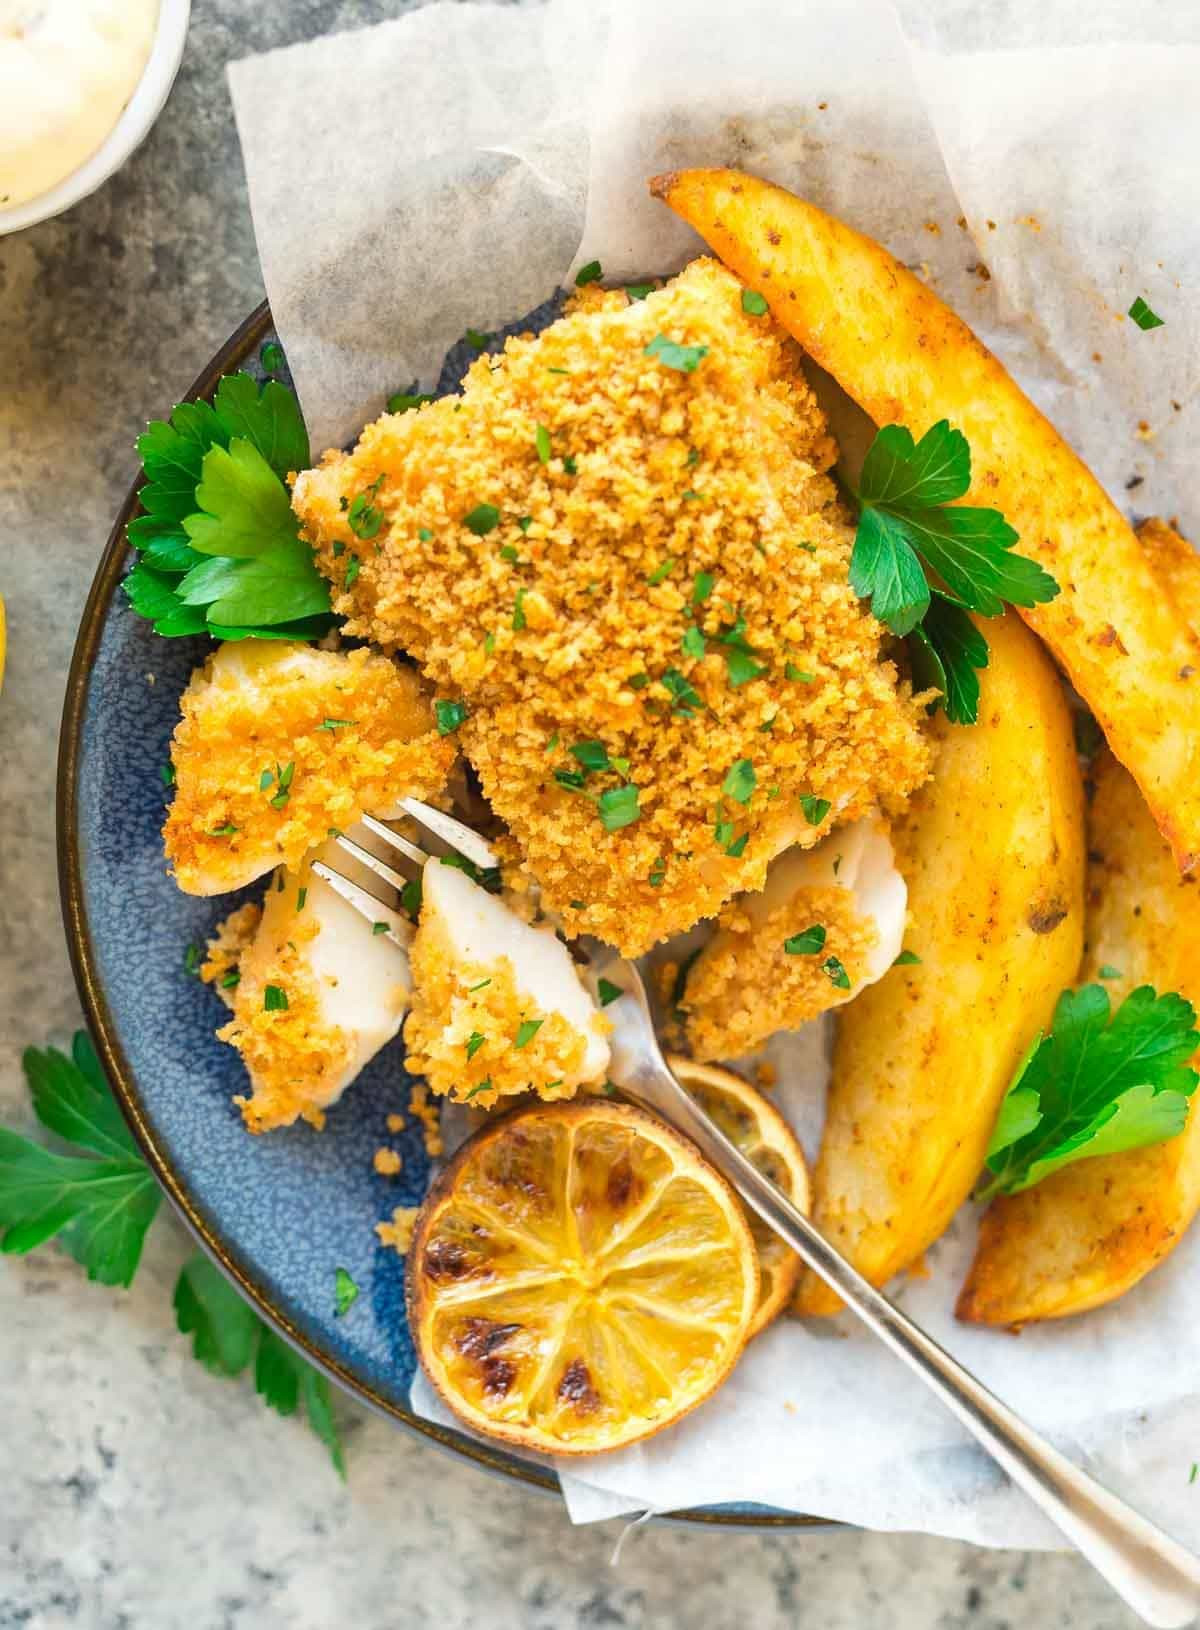 Recipes For Fish And Chips
 Baked Fish and Chips Recipe